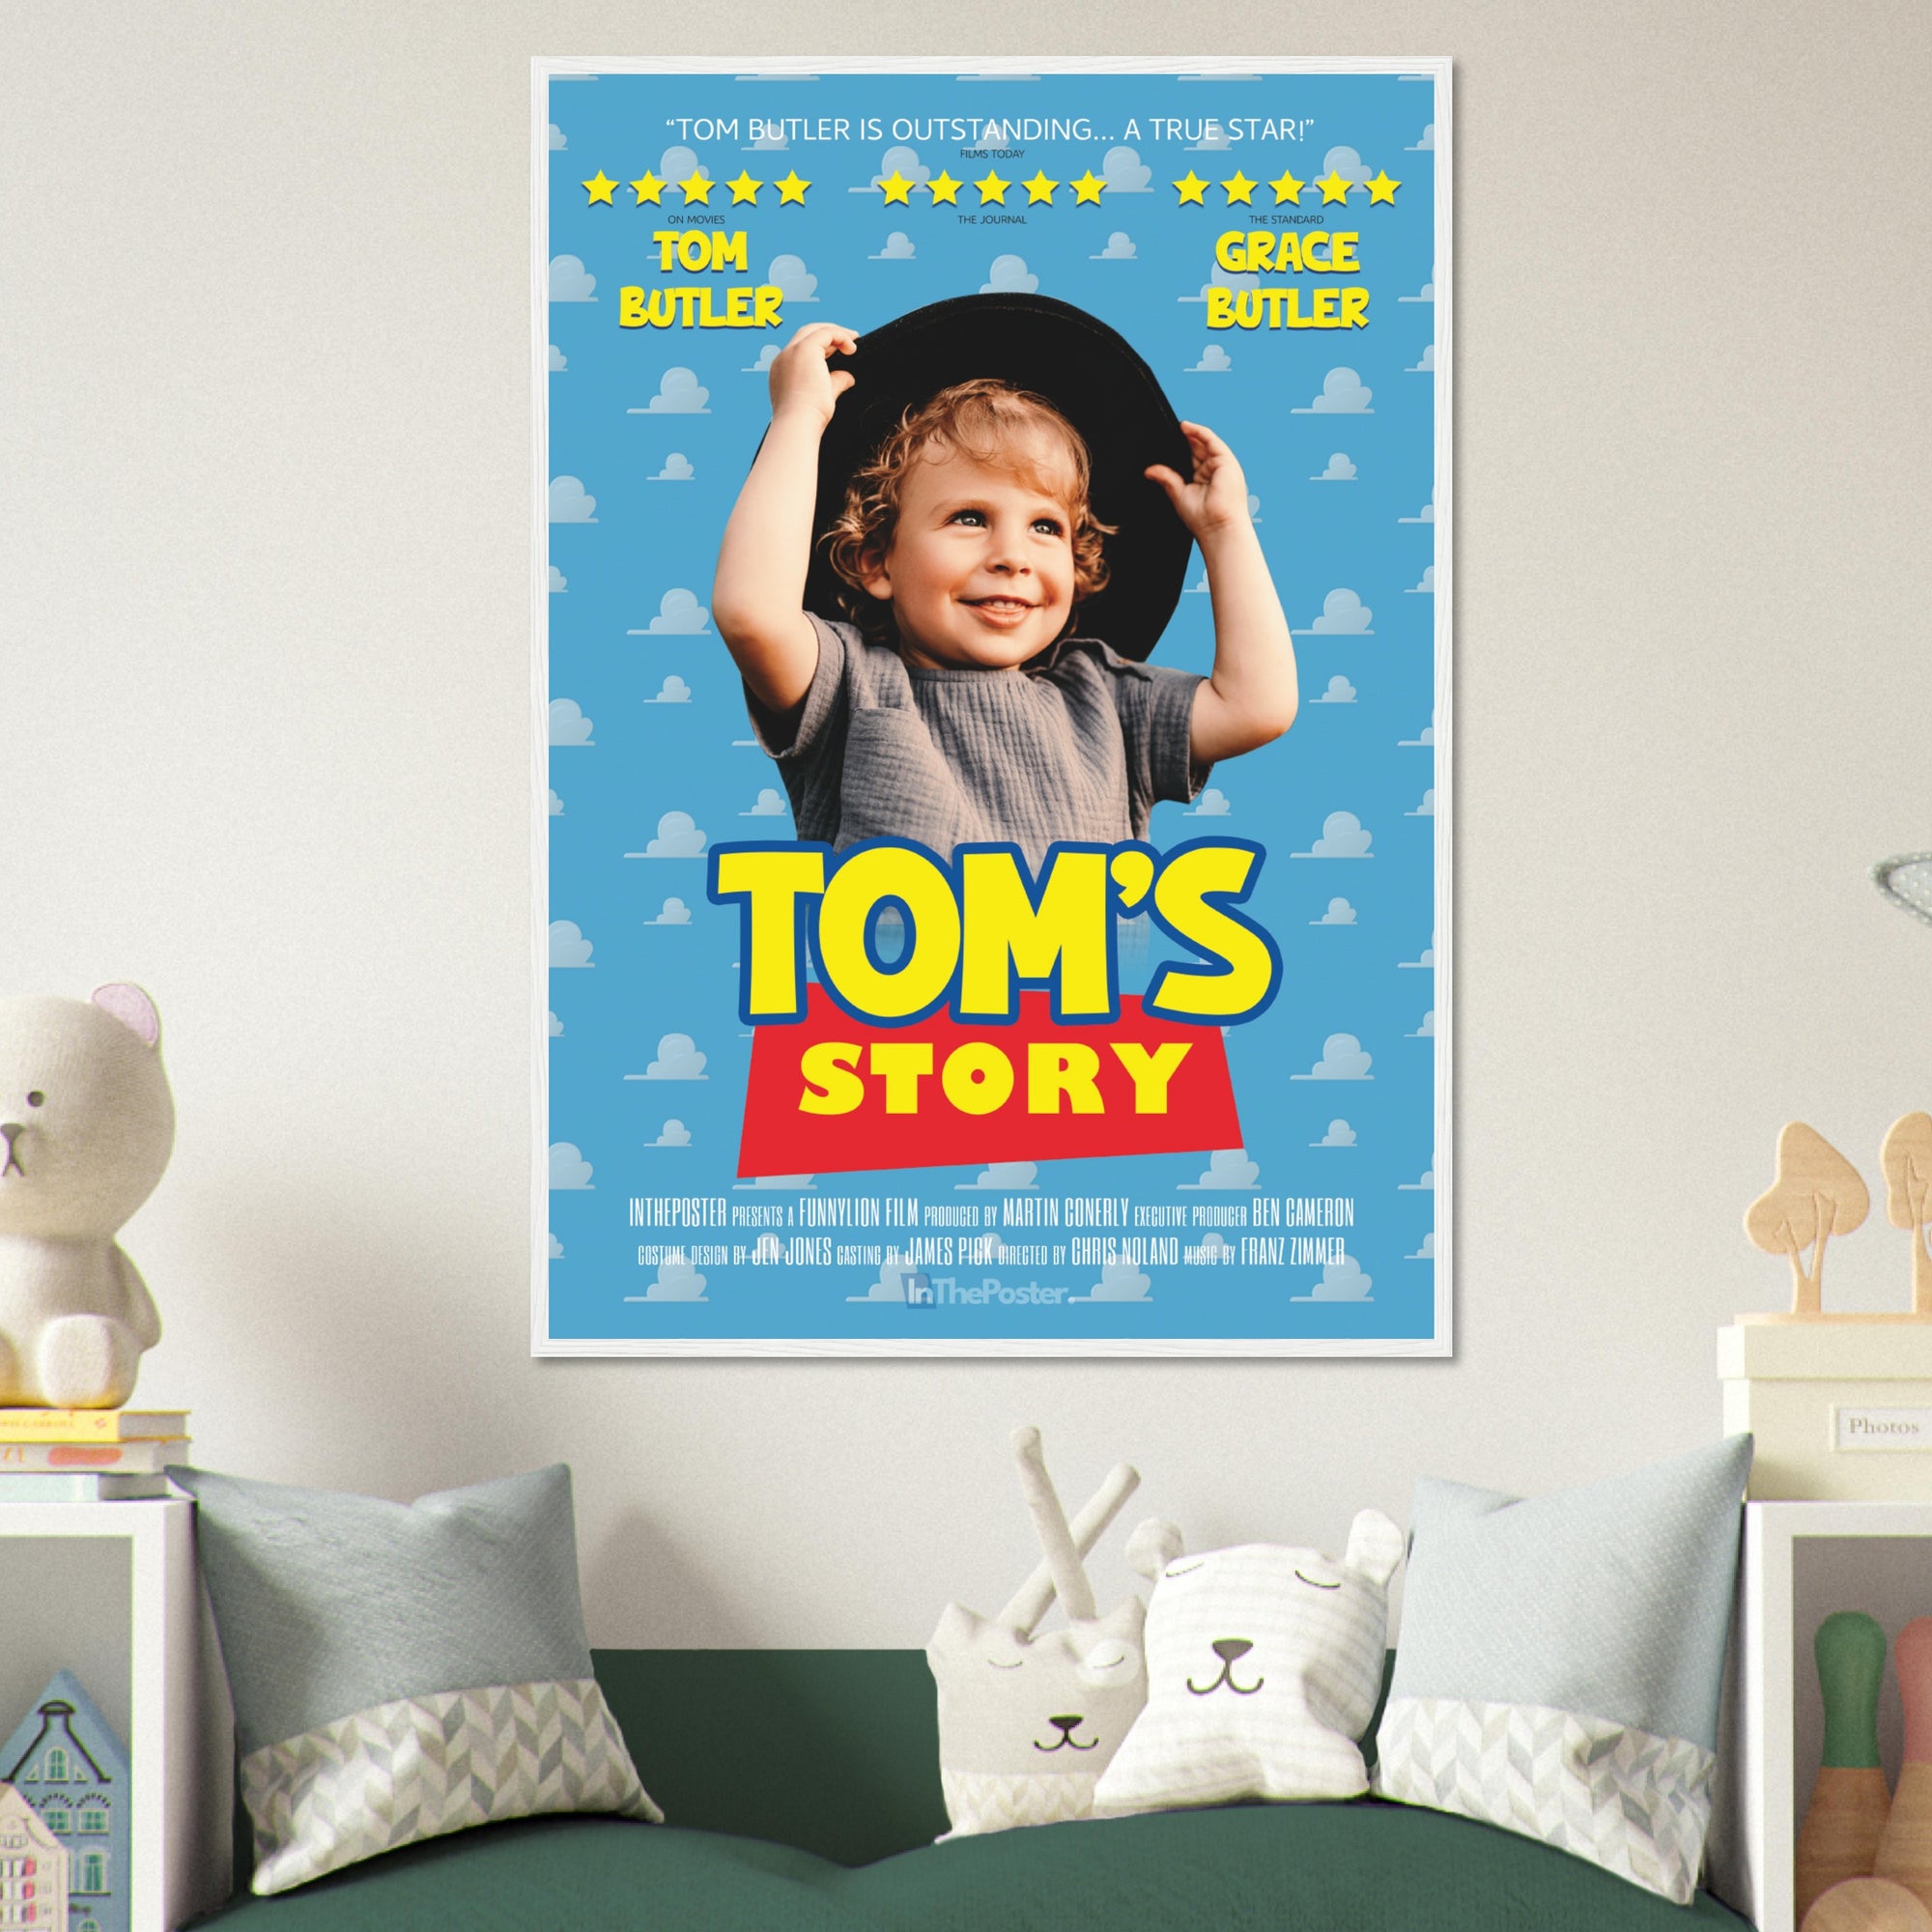 A Toy Story inspired movie poster design in an XL white frame, on a grey wall in a kids bedroom